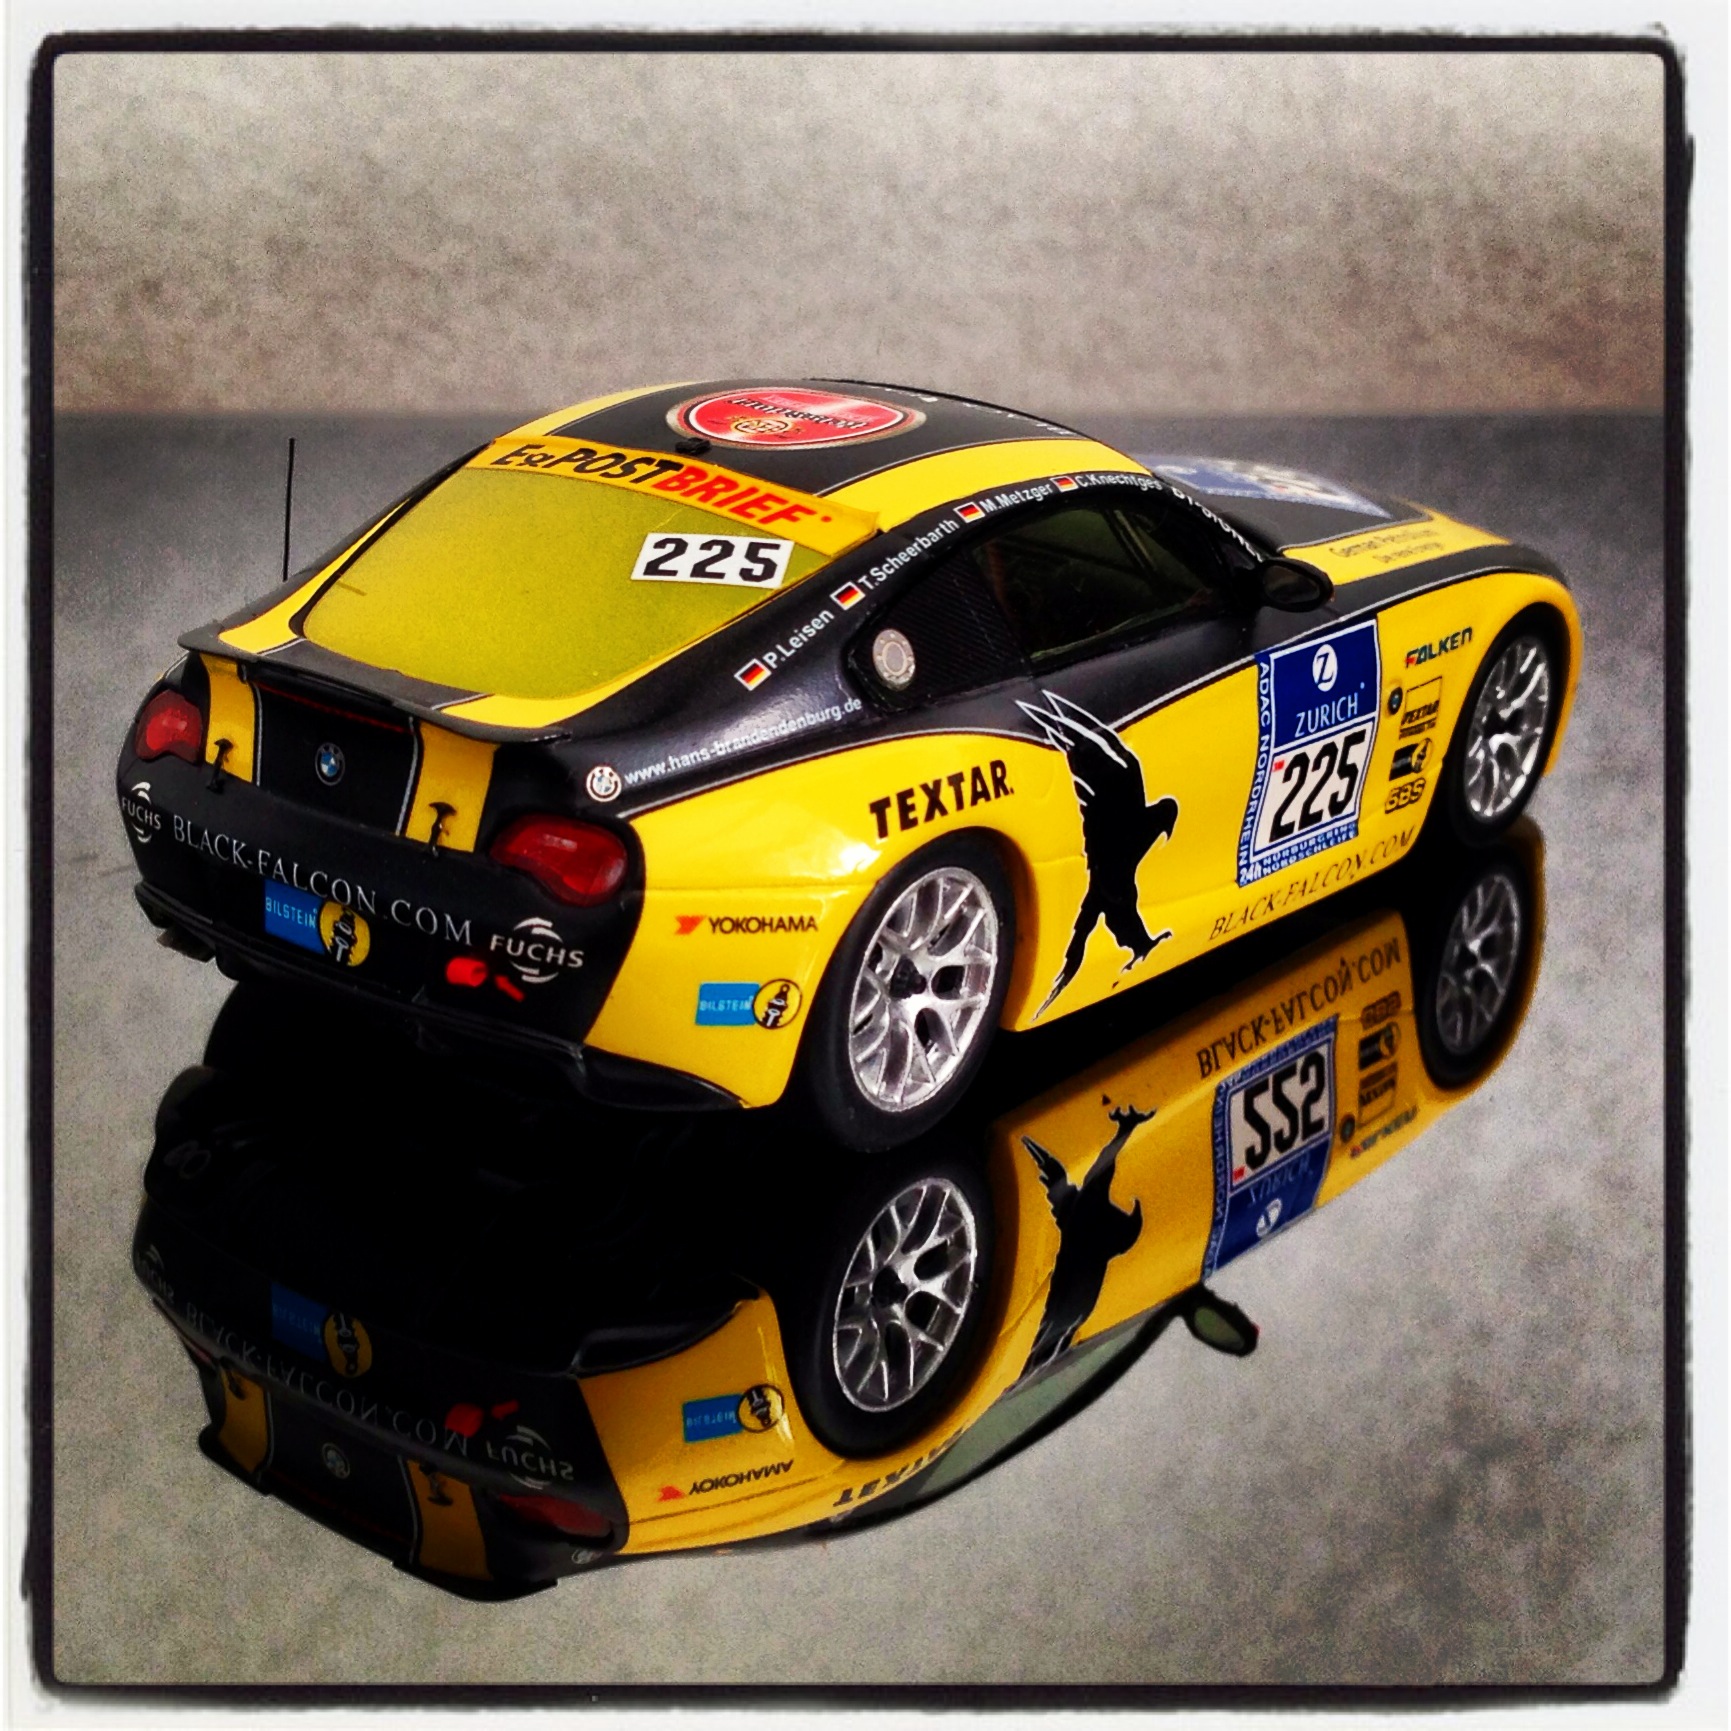 BMW Z4 (E85) Black Falcon team TMD Friction, 24h ADAC Nurburgring 2011, #225 Knechtges/Metzger/Scheerbarth/Leisen, le 1 of 1,010pcs. (minichamps)